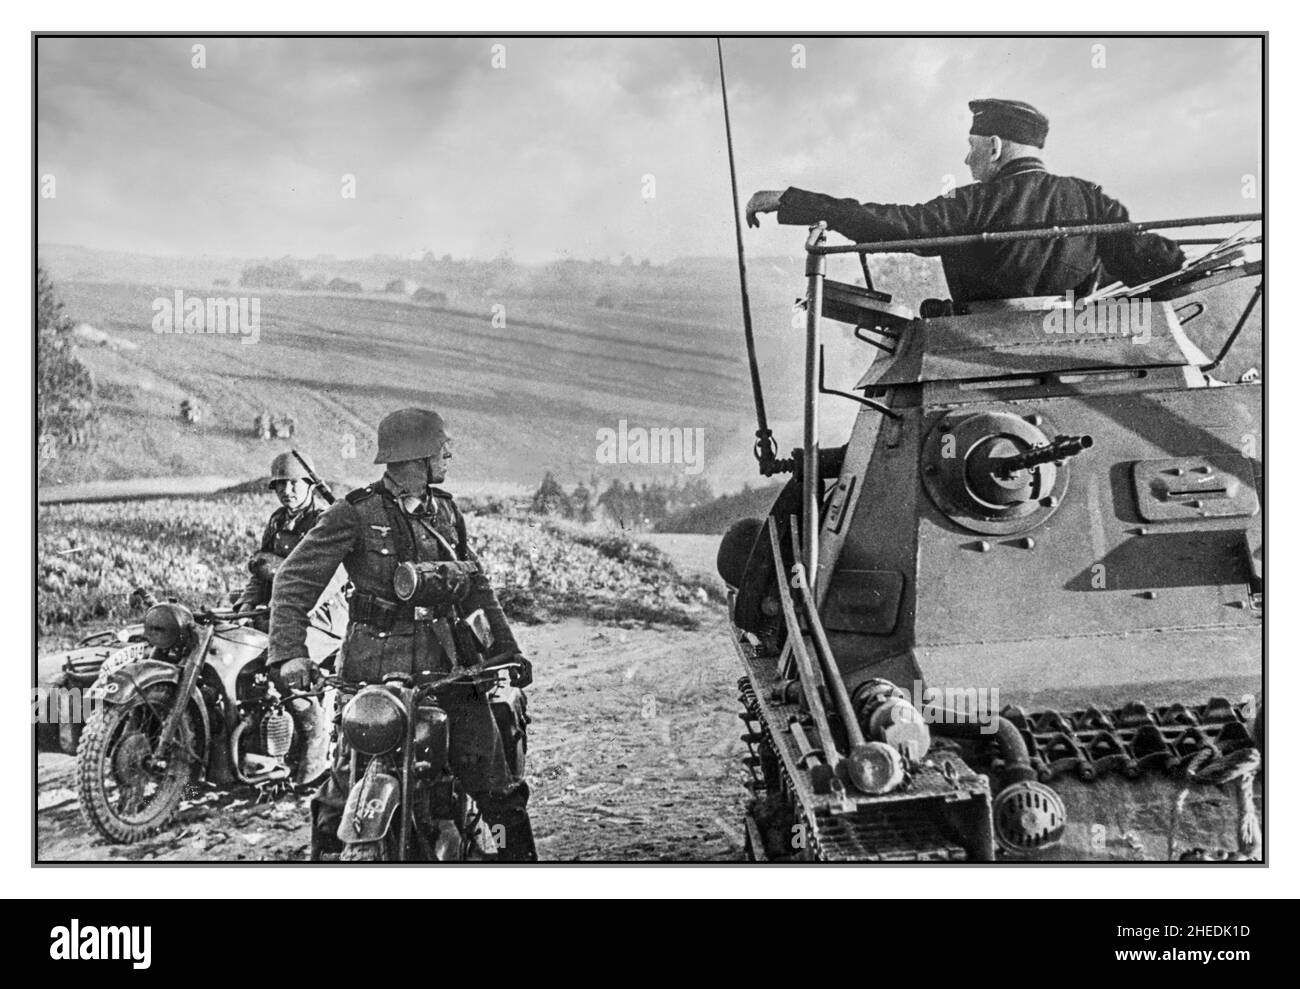 WW2 Operation Barbarossa Two motorcyclists on BMW R71 bikes, after returning from patrol, report to their Nazi tank commander standing on a Panzerbefehlswagen Panzer I Ausf. B - KlPzBfWg tank Stock Photo